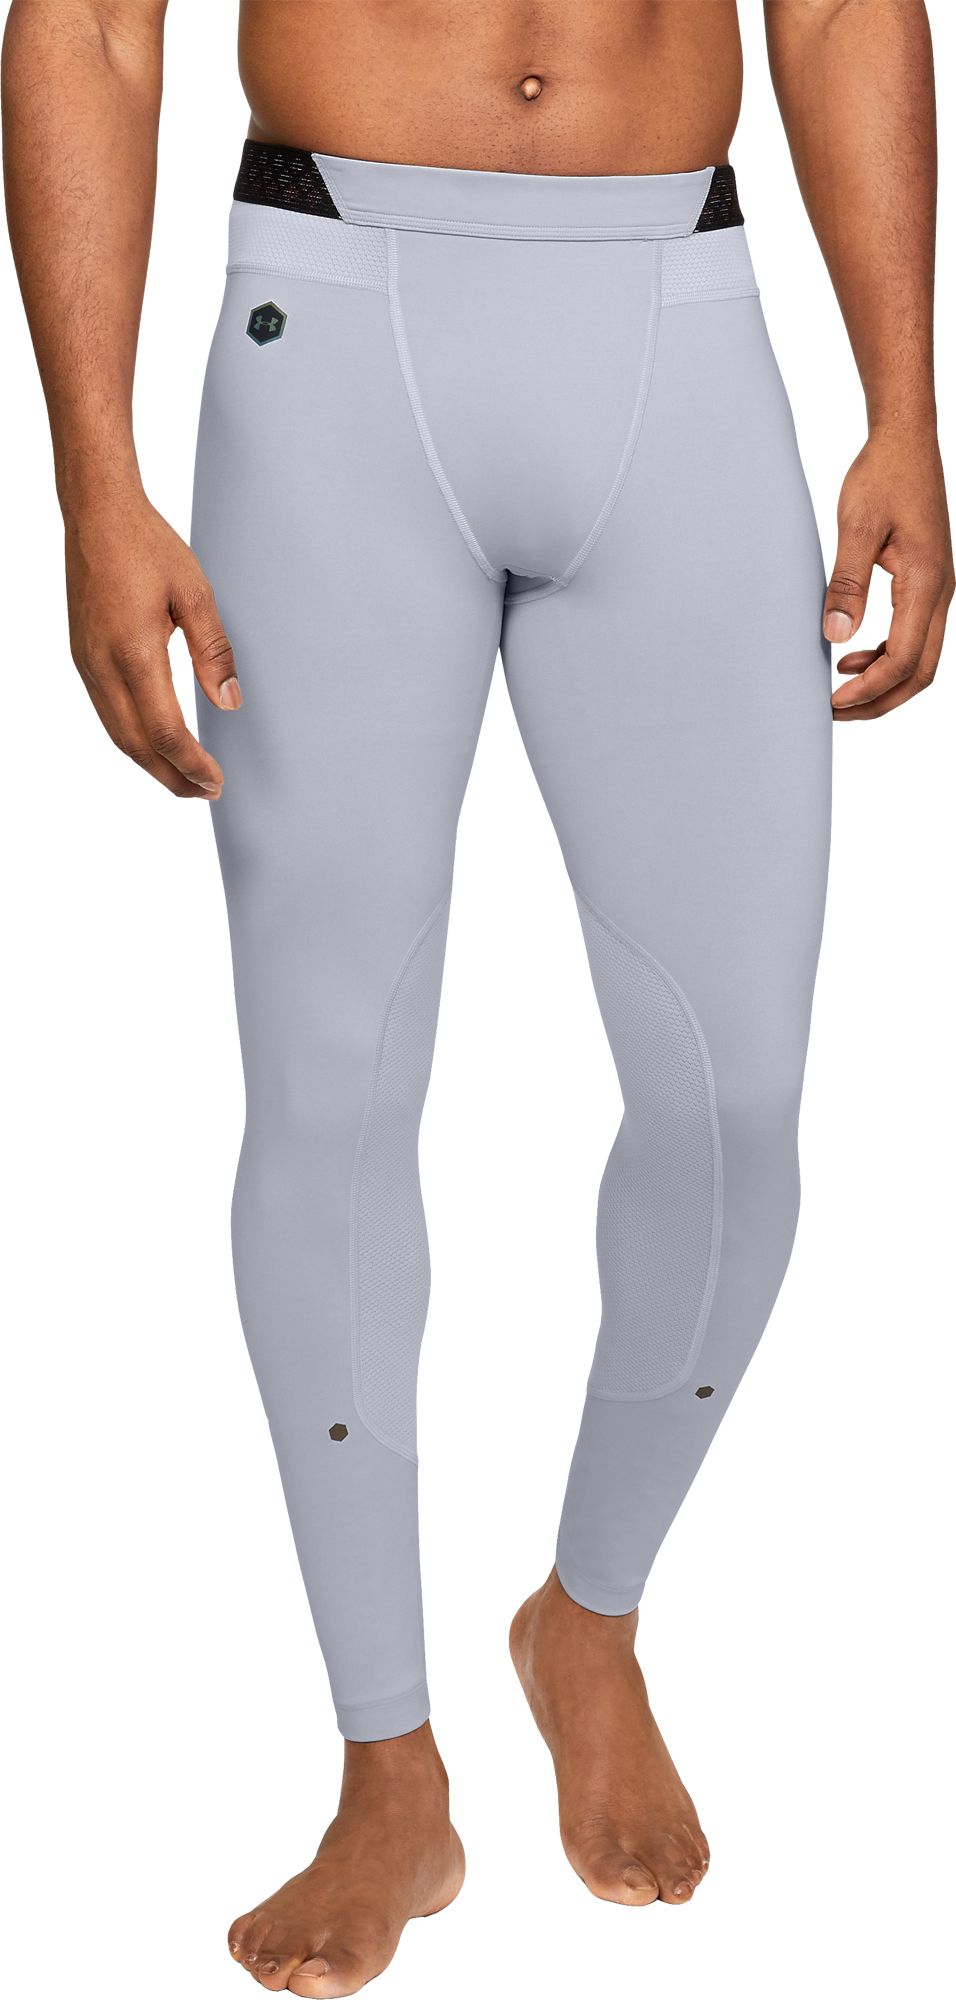 men's under armour tights